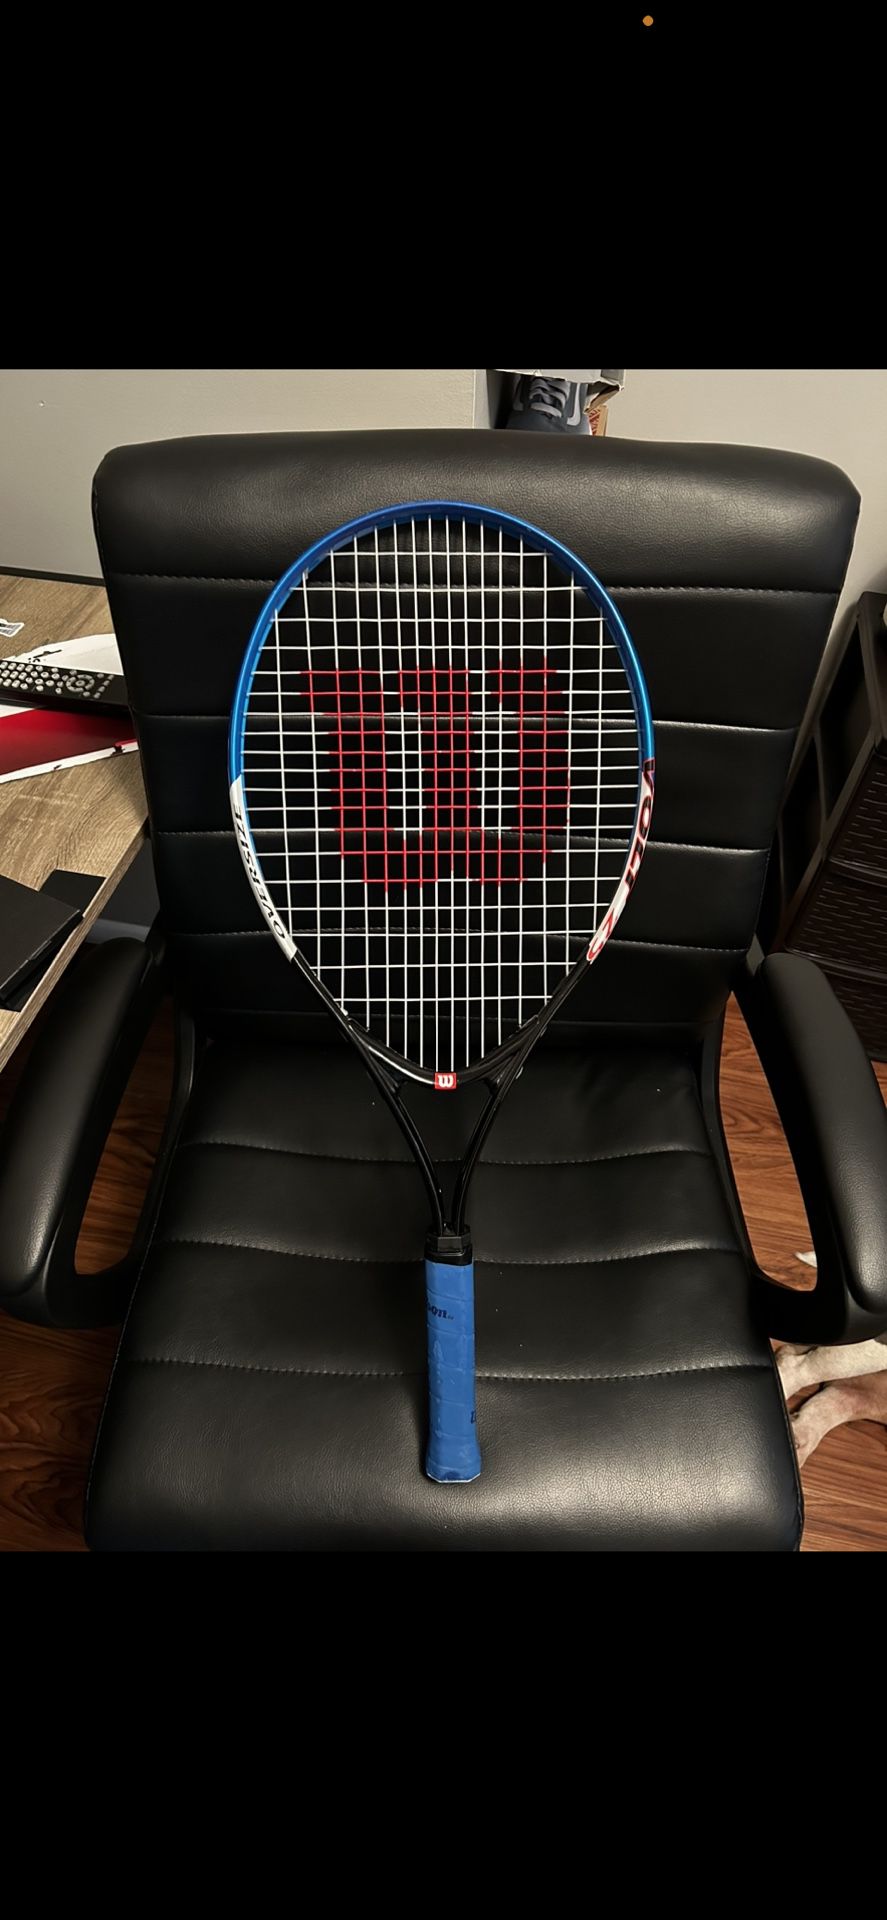 4 Tennis Rackets 60 For All 3 Wilson & One Fin